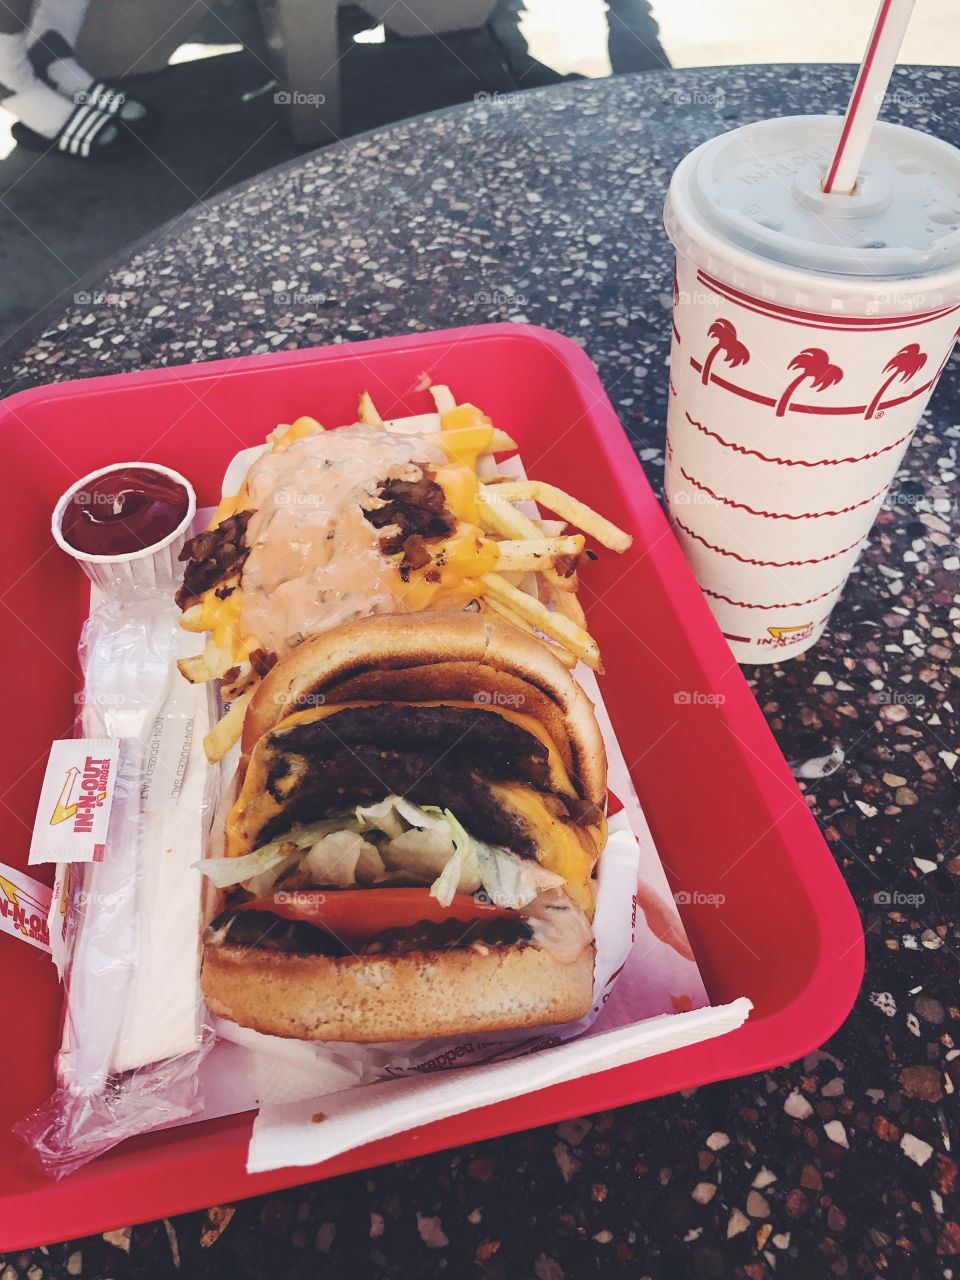 In n out burger 